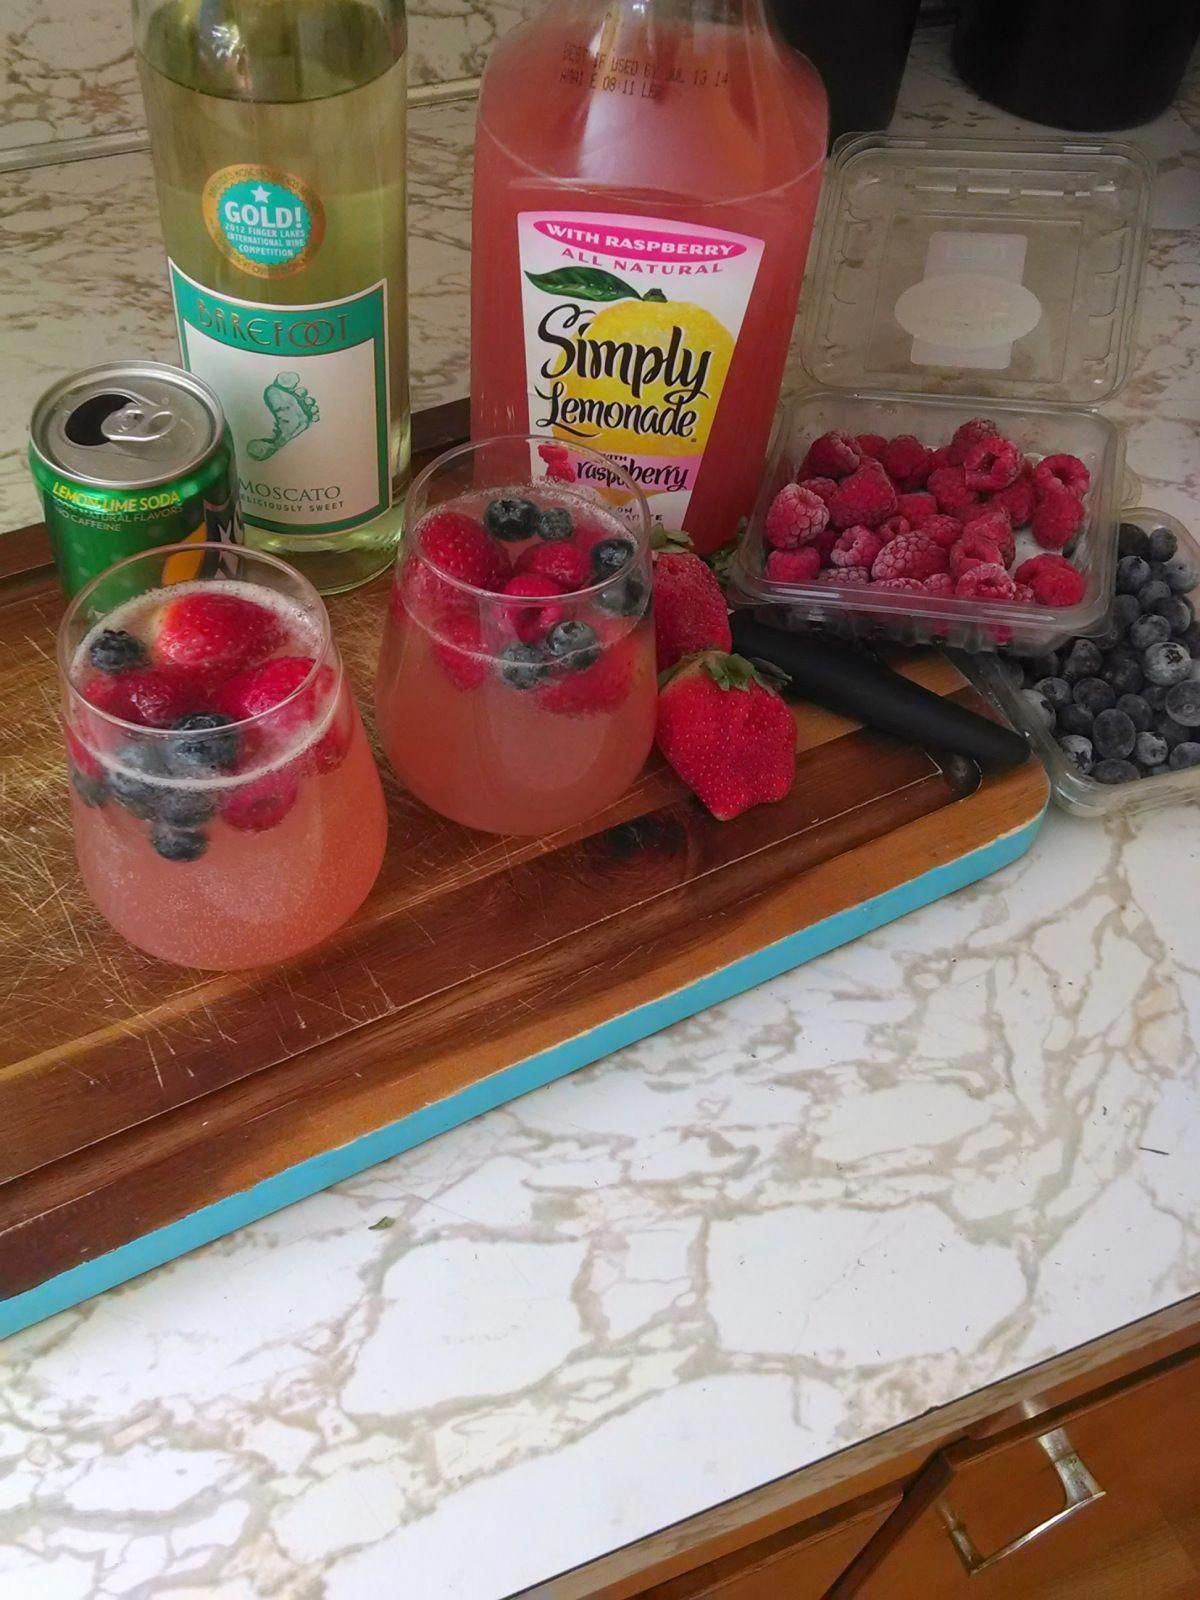 Easter Punch Recipe
 Moscato wine punch so good Made this for Easter brunch